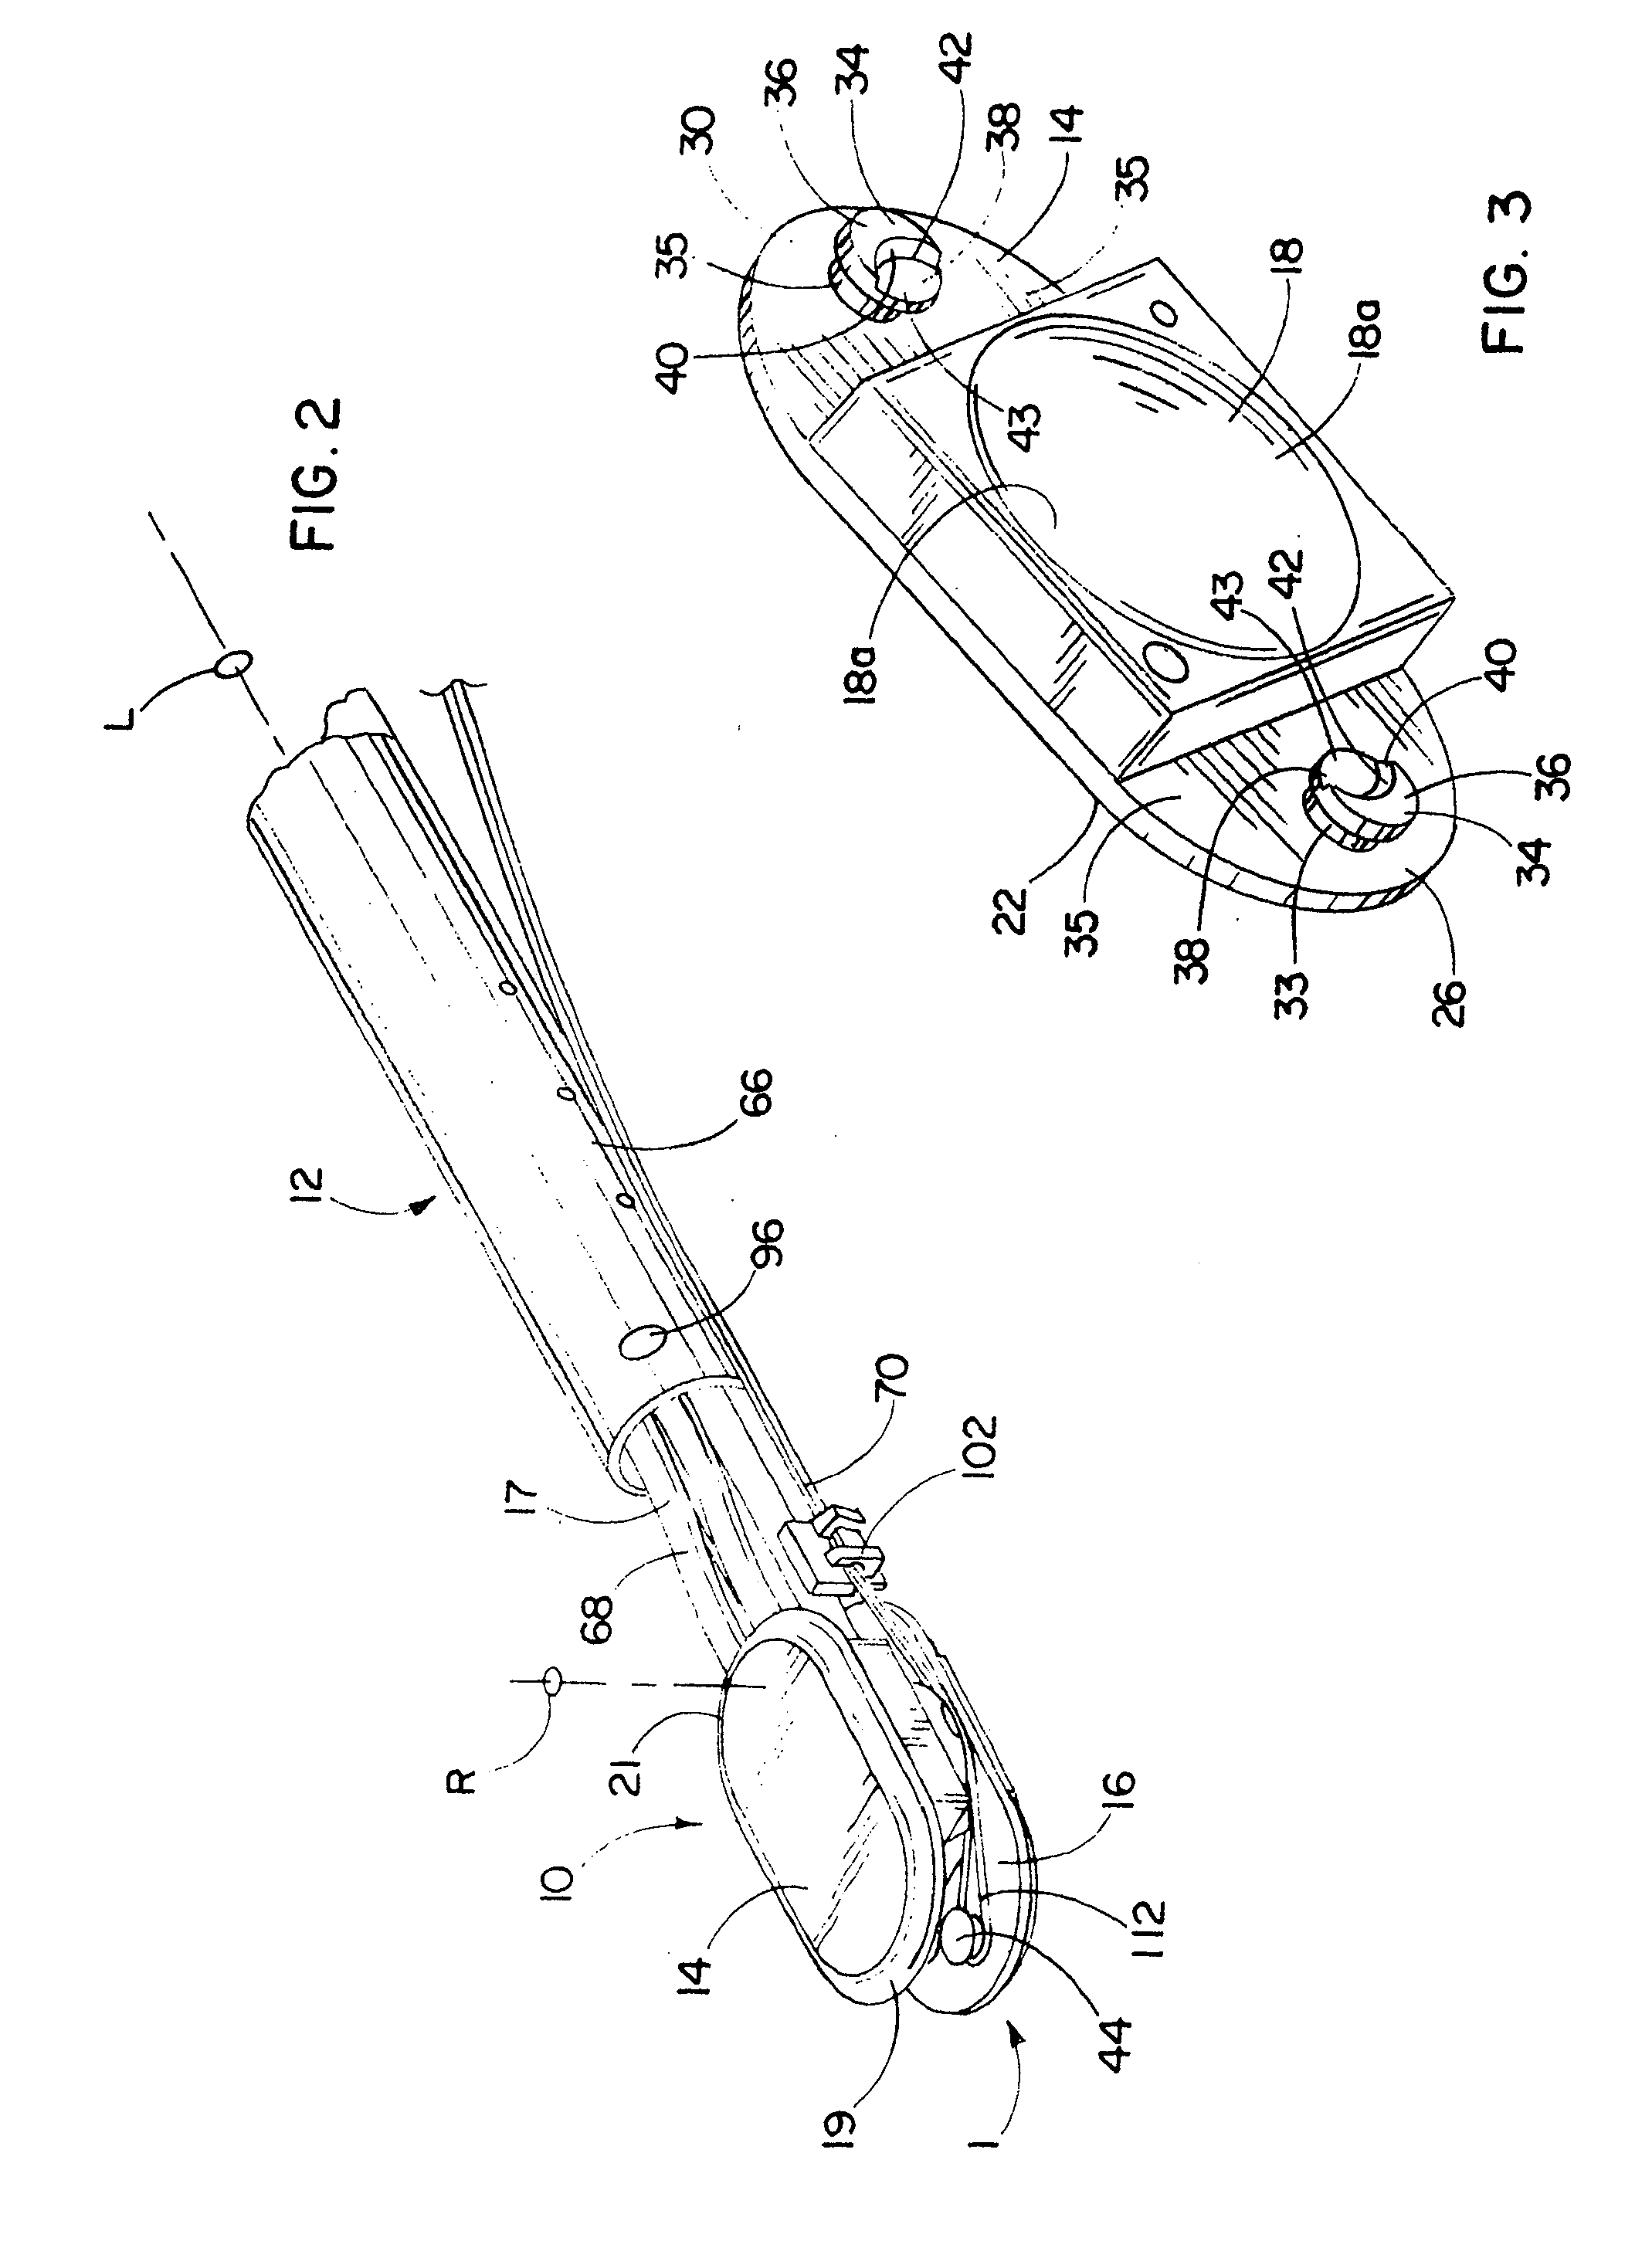 System and Methods for Inserting a Spinal Disc Device Into an Intervertebral Space